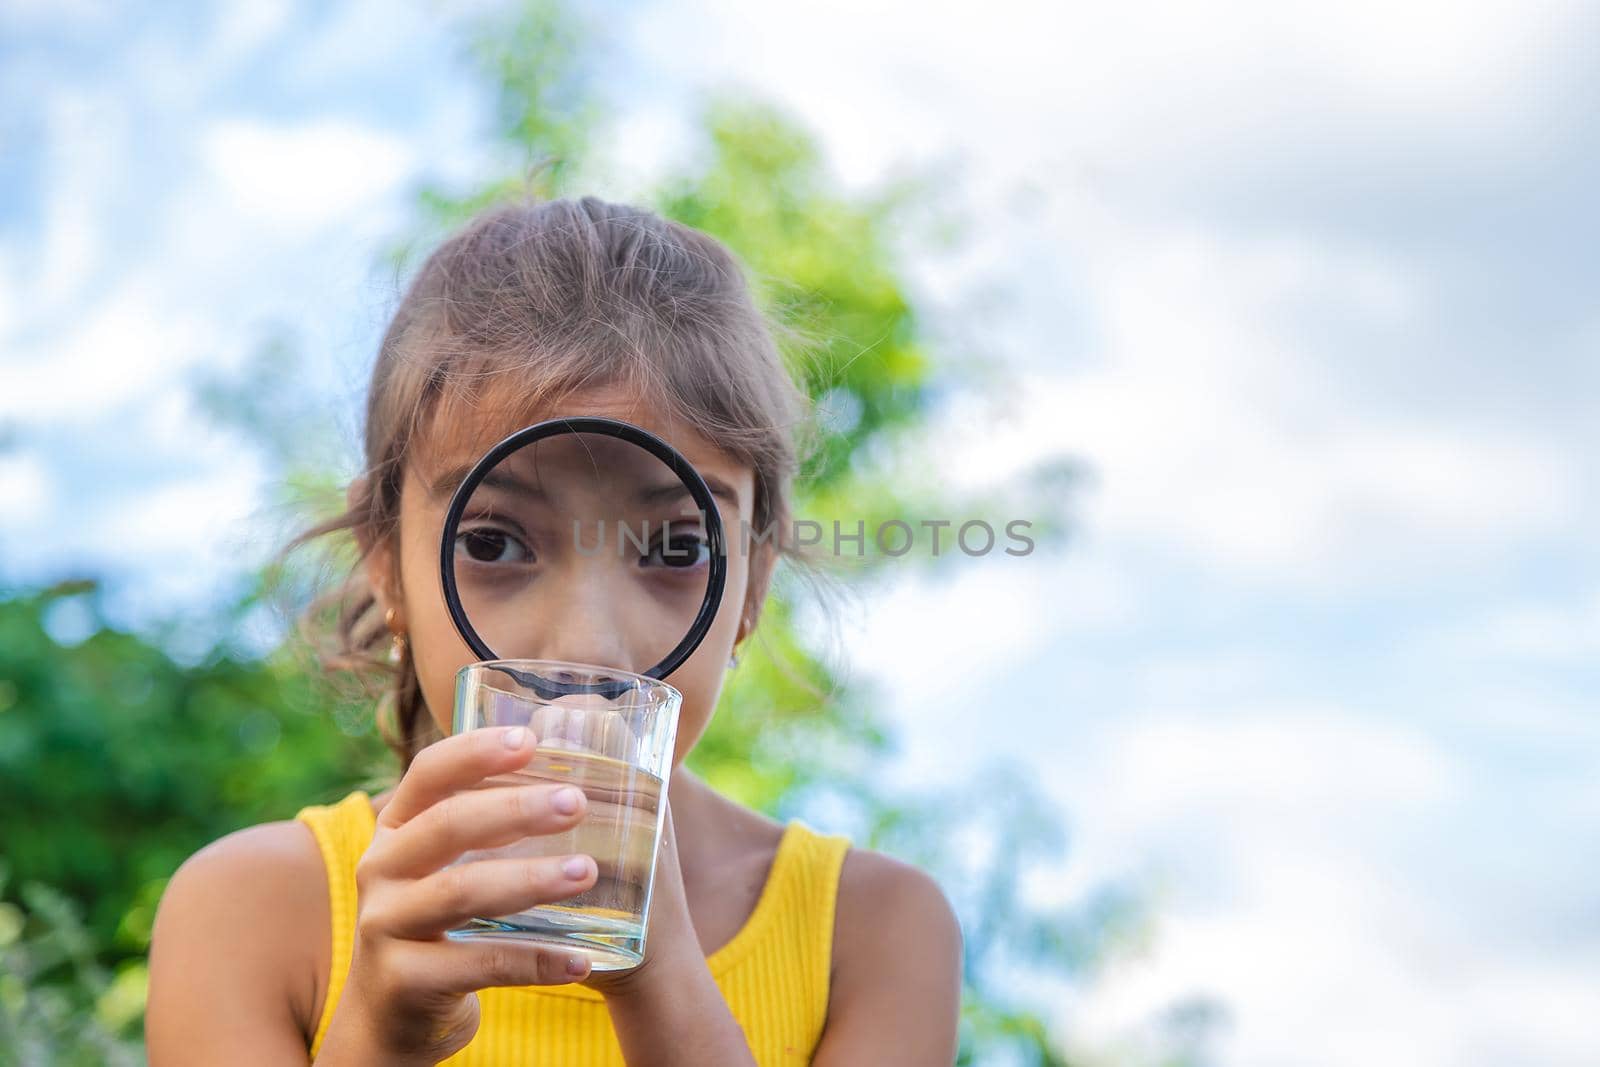 The child examines a glass of water with a magnifying glass. Selective focus. Kid.